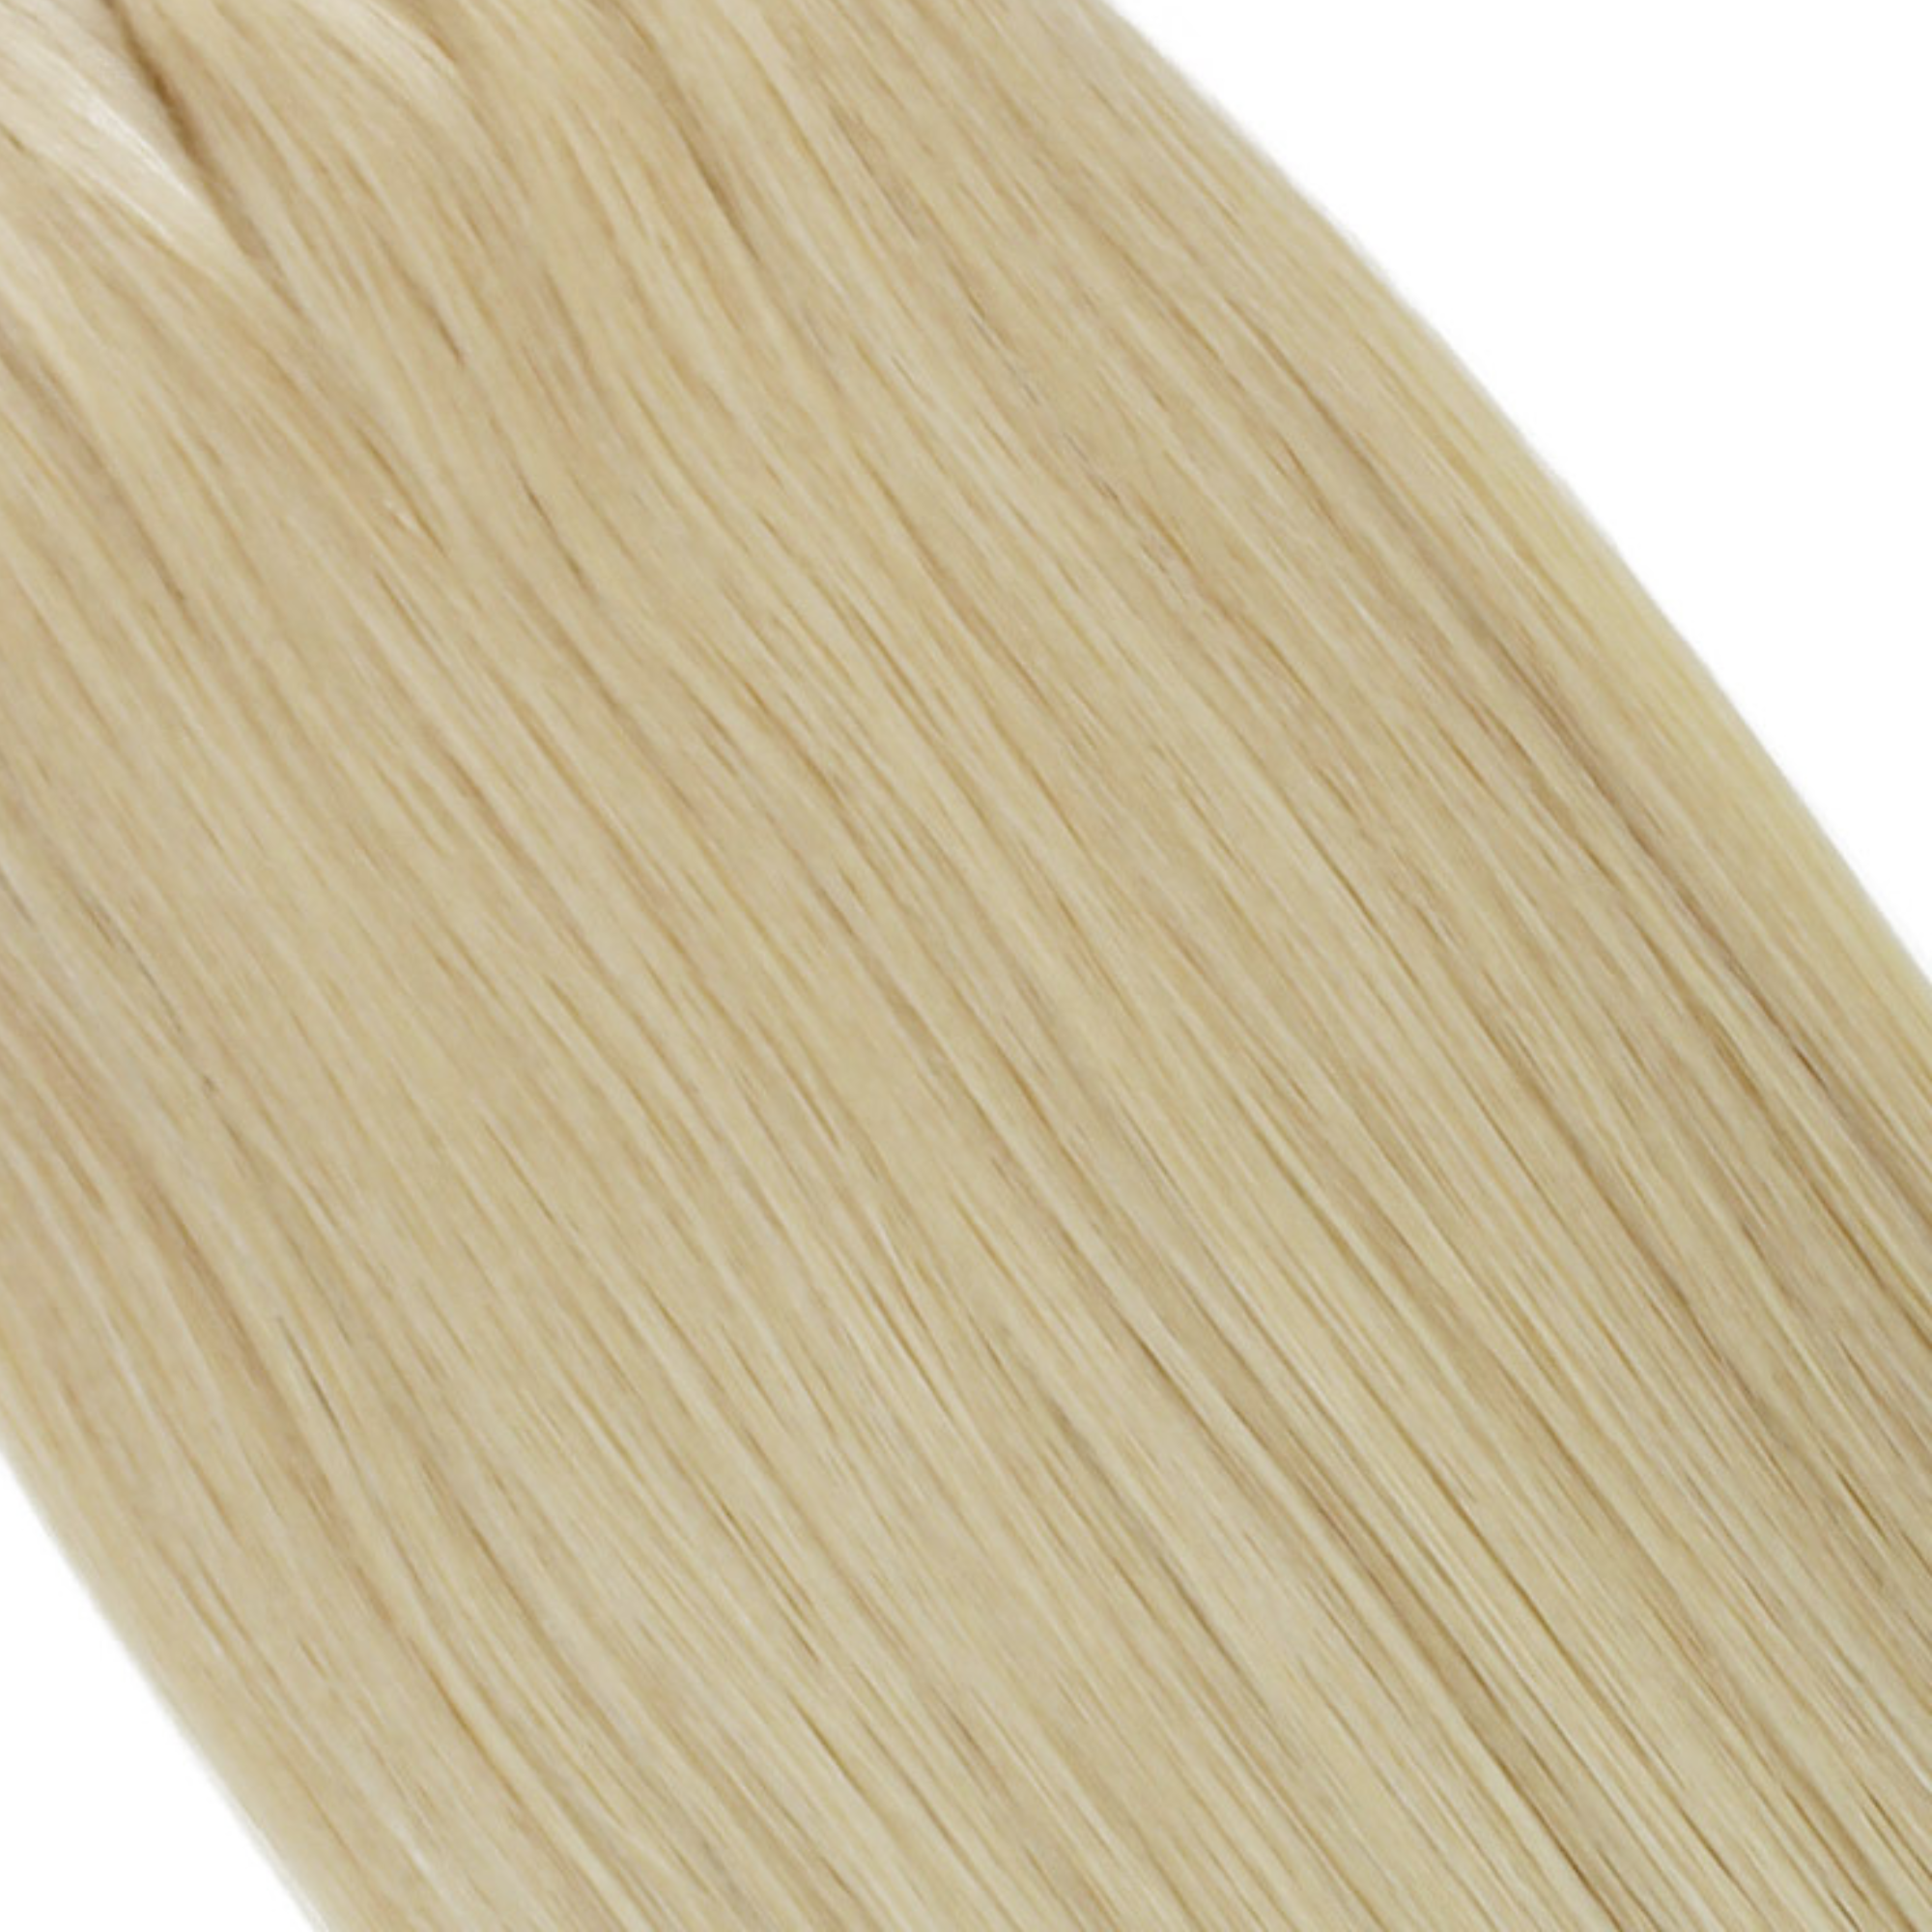 "hair rehab london 24" length 280 grams weight ultimate clip-in hair extensions shade titled platinum"